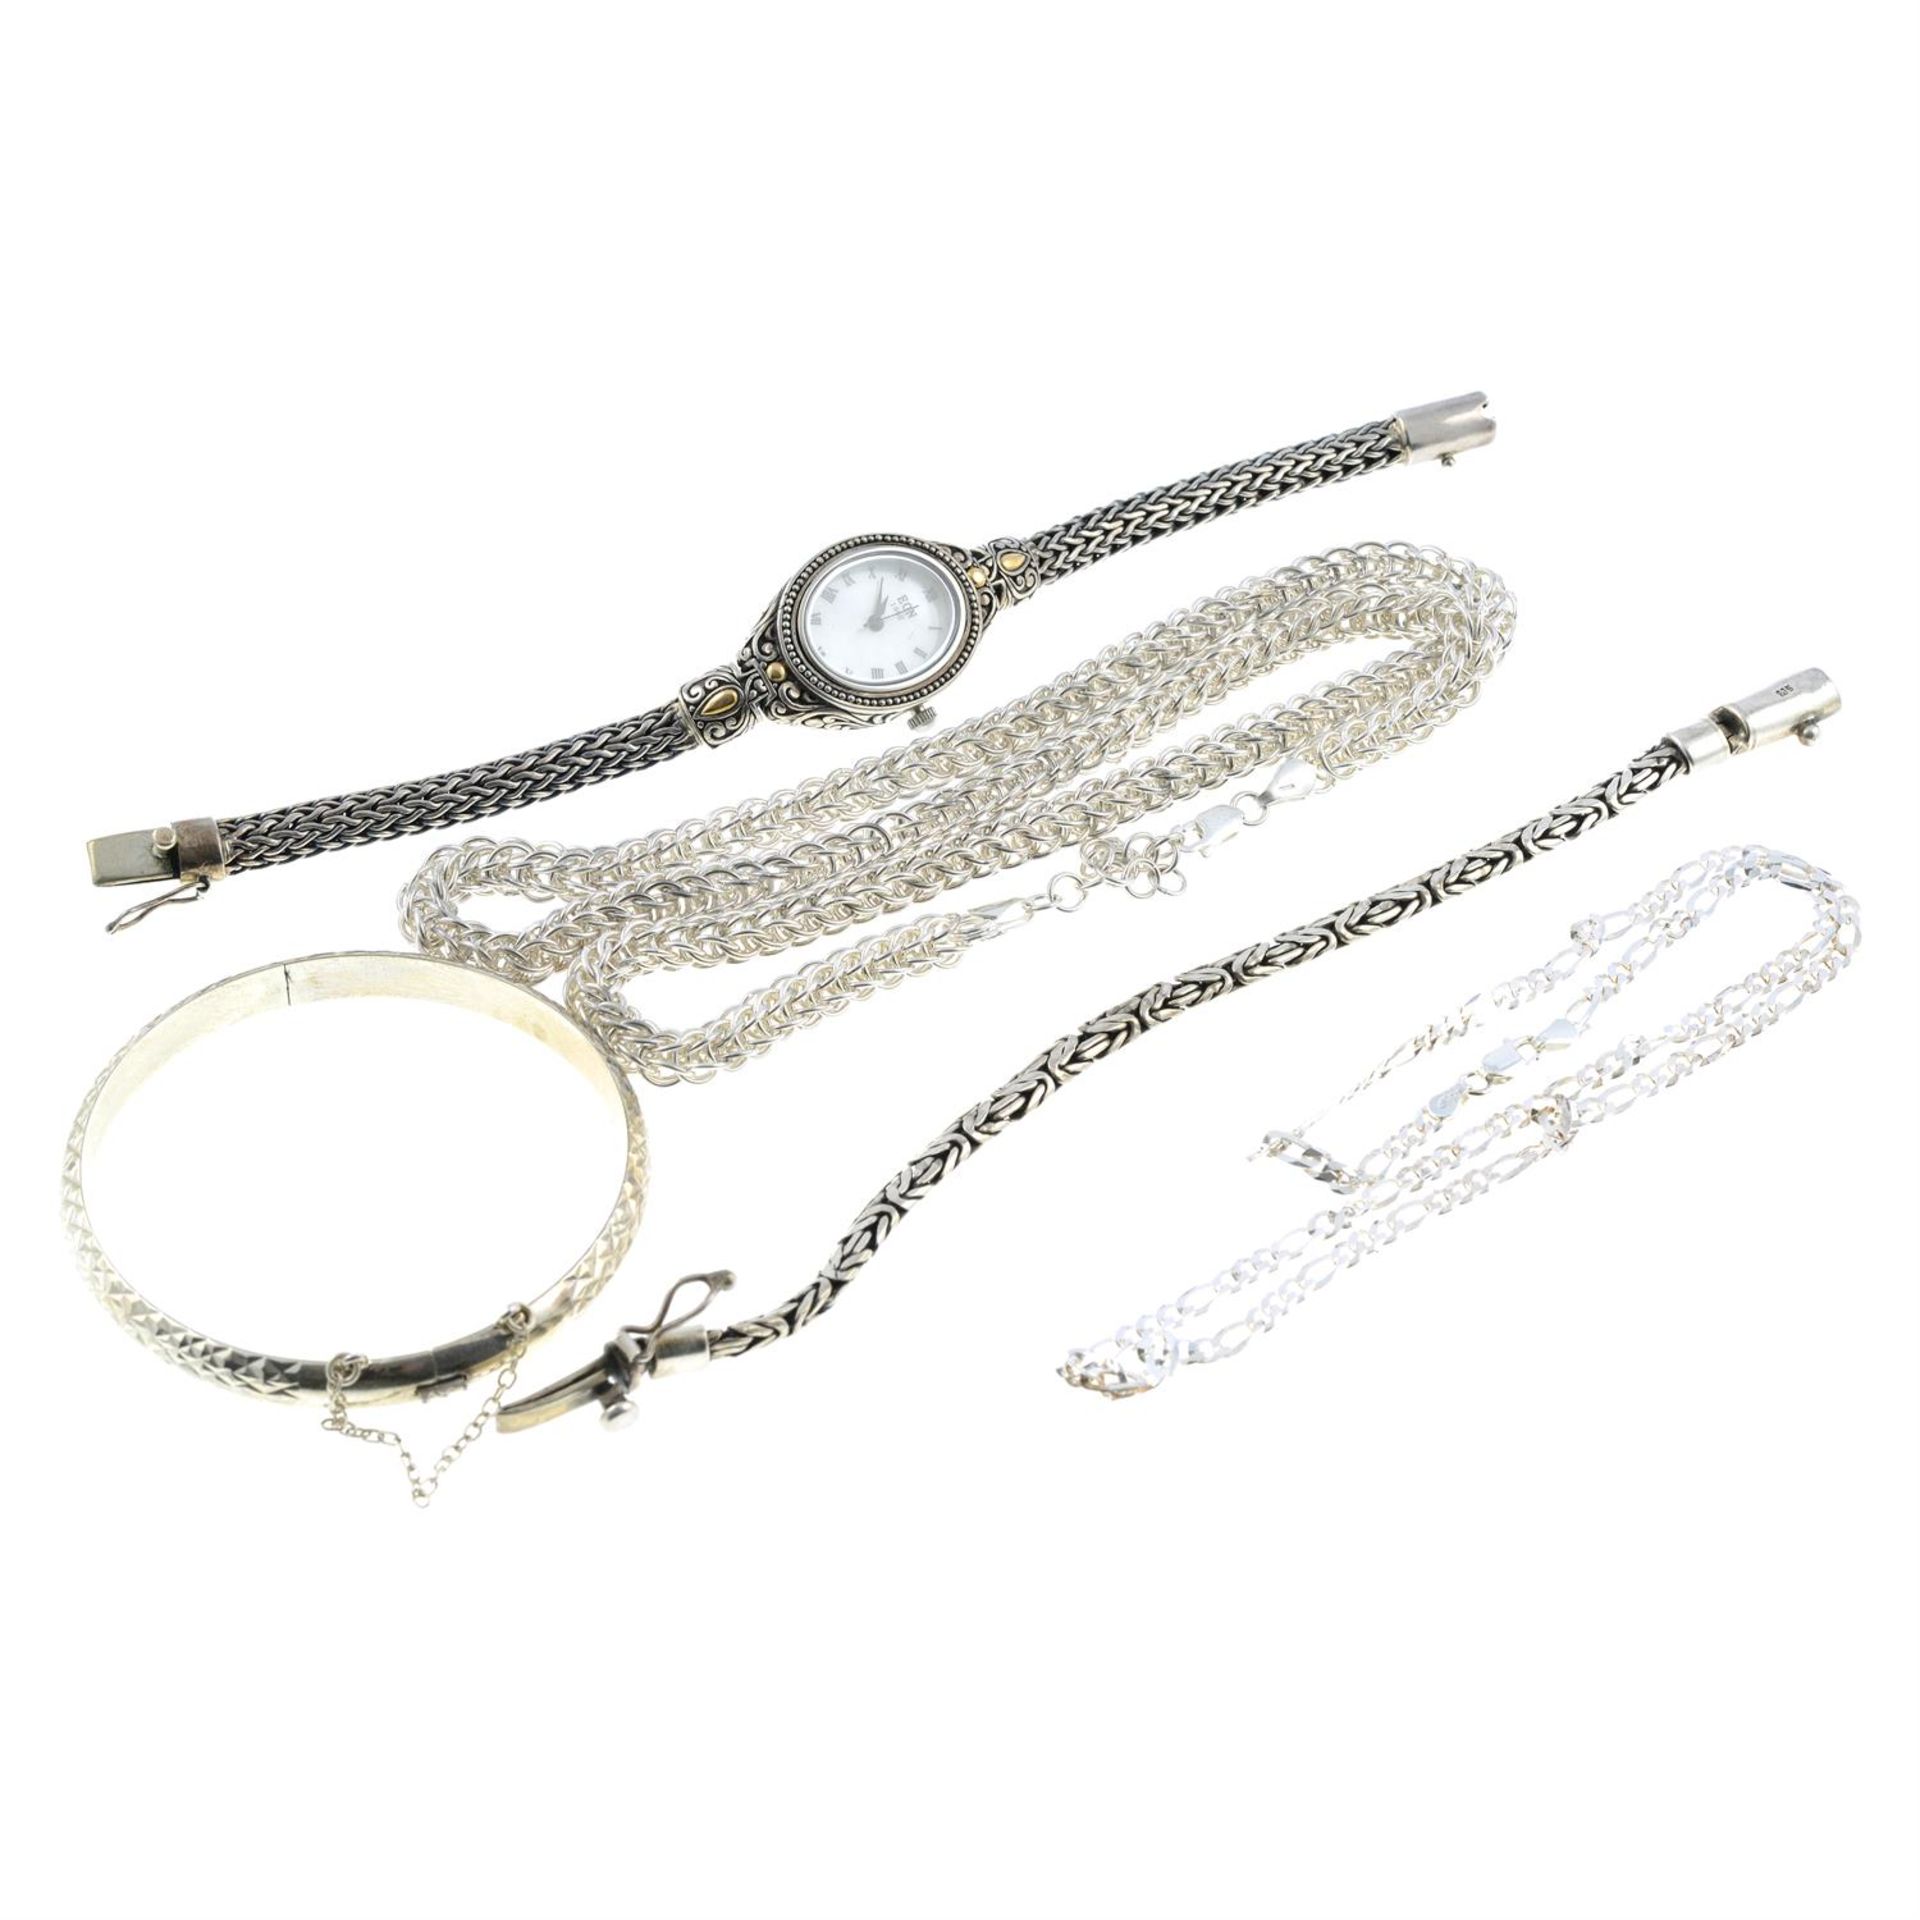 A selection of jewellery, to include two chains, a bracelet, a bangle and a wrist watch. - Image 2 of 2